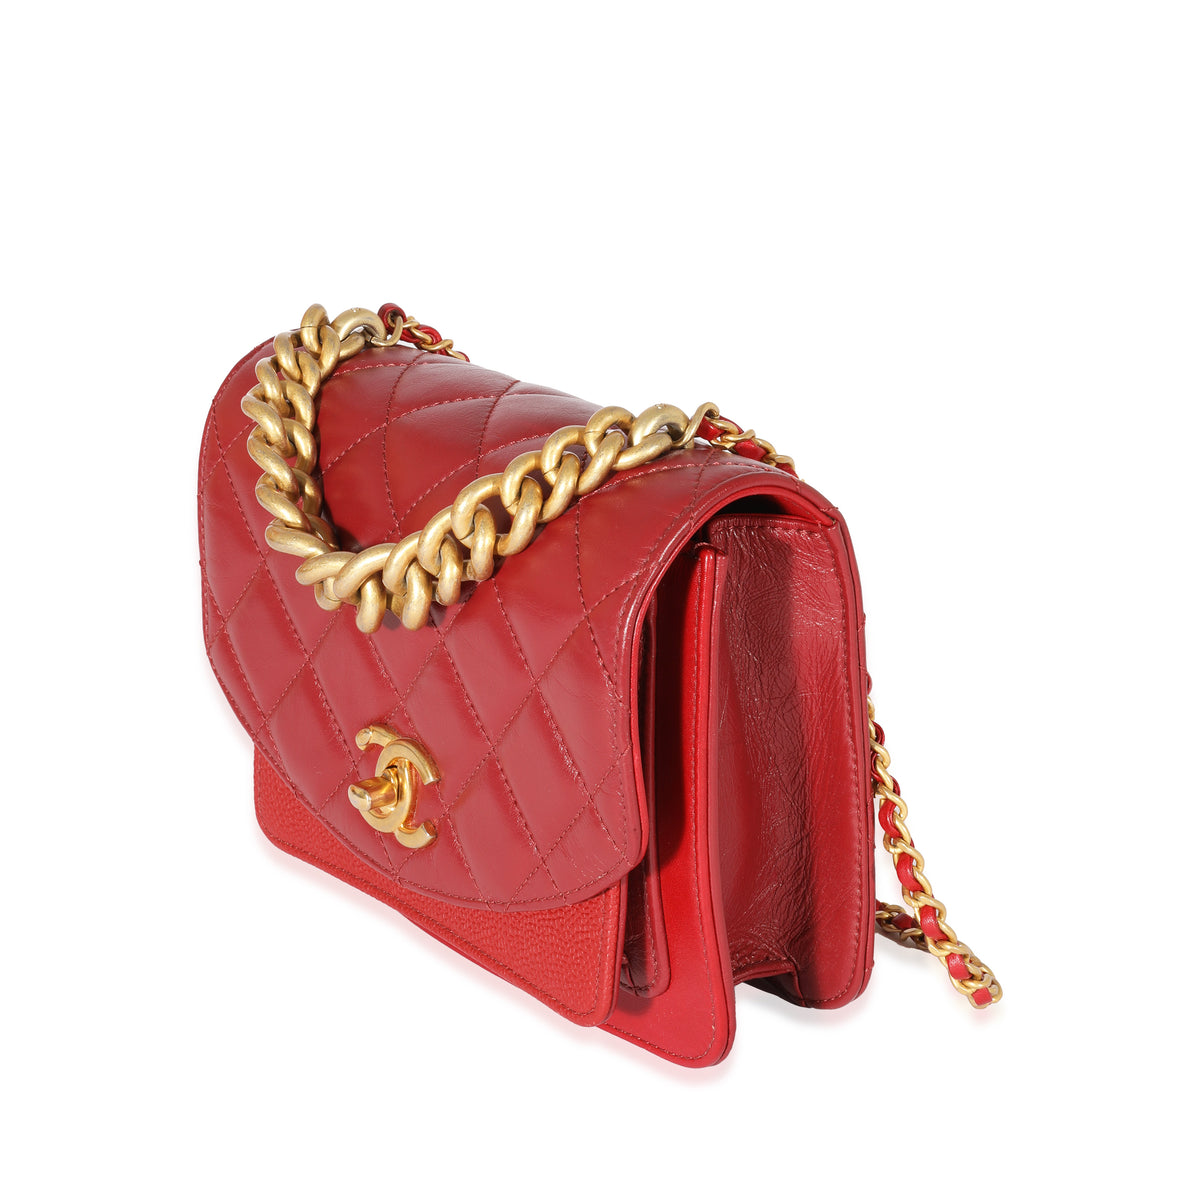 Chanel Red Leather Top Chain Flap Bag, myGemma, JP